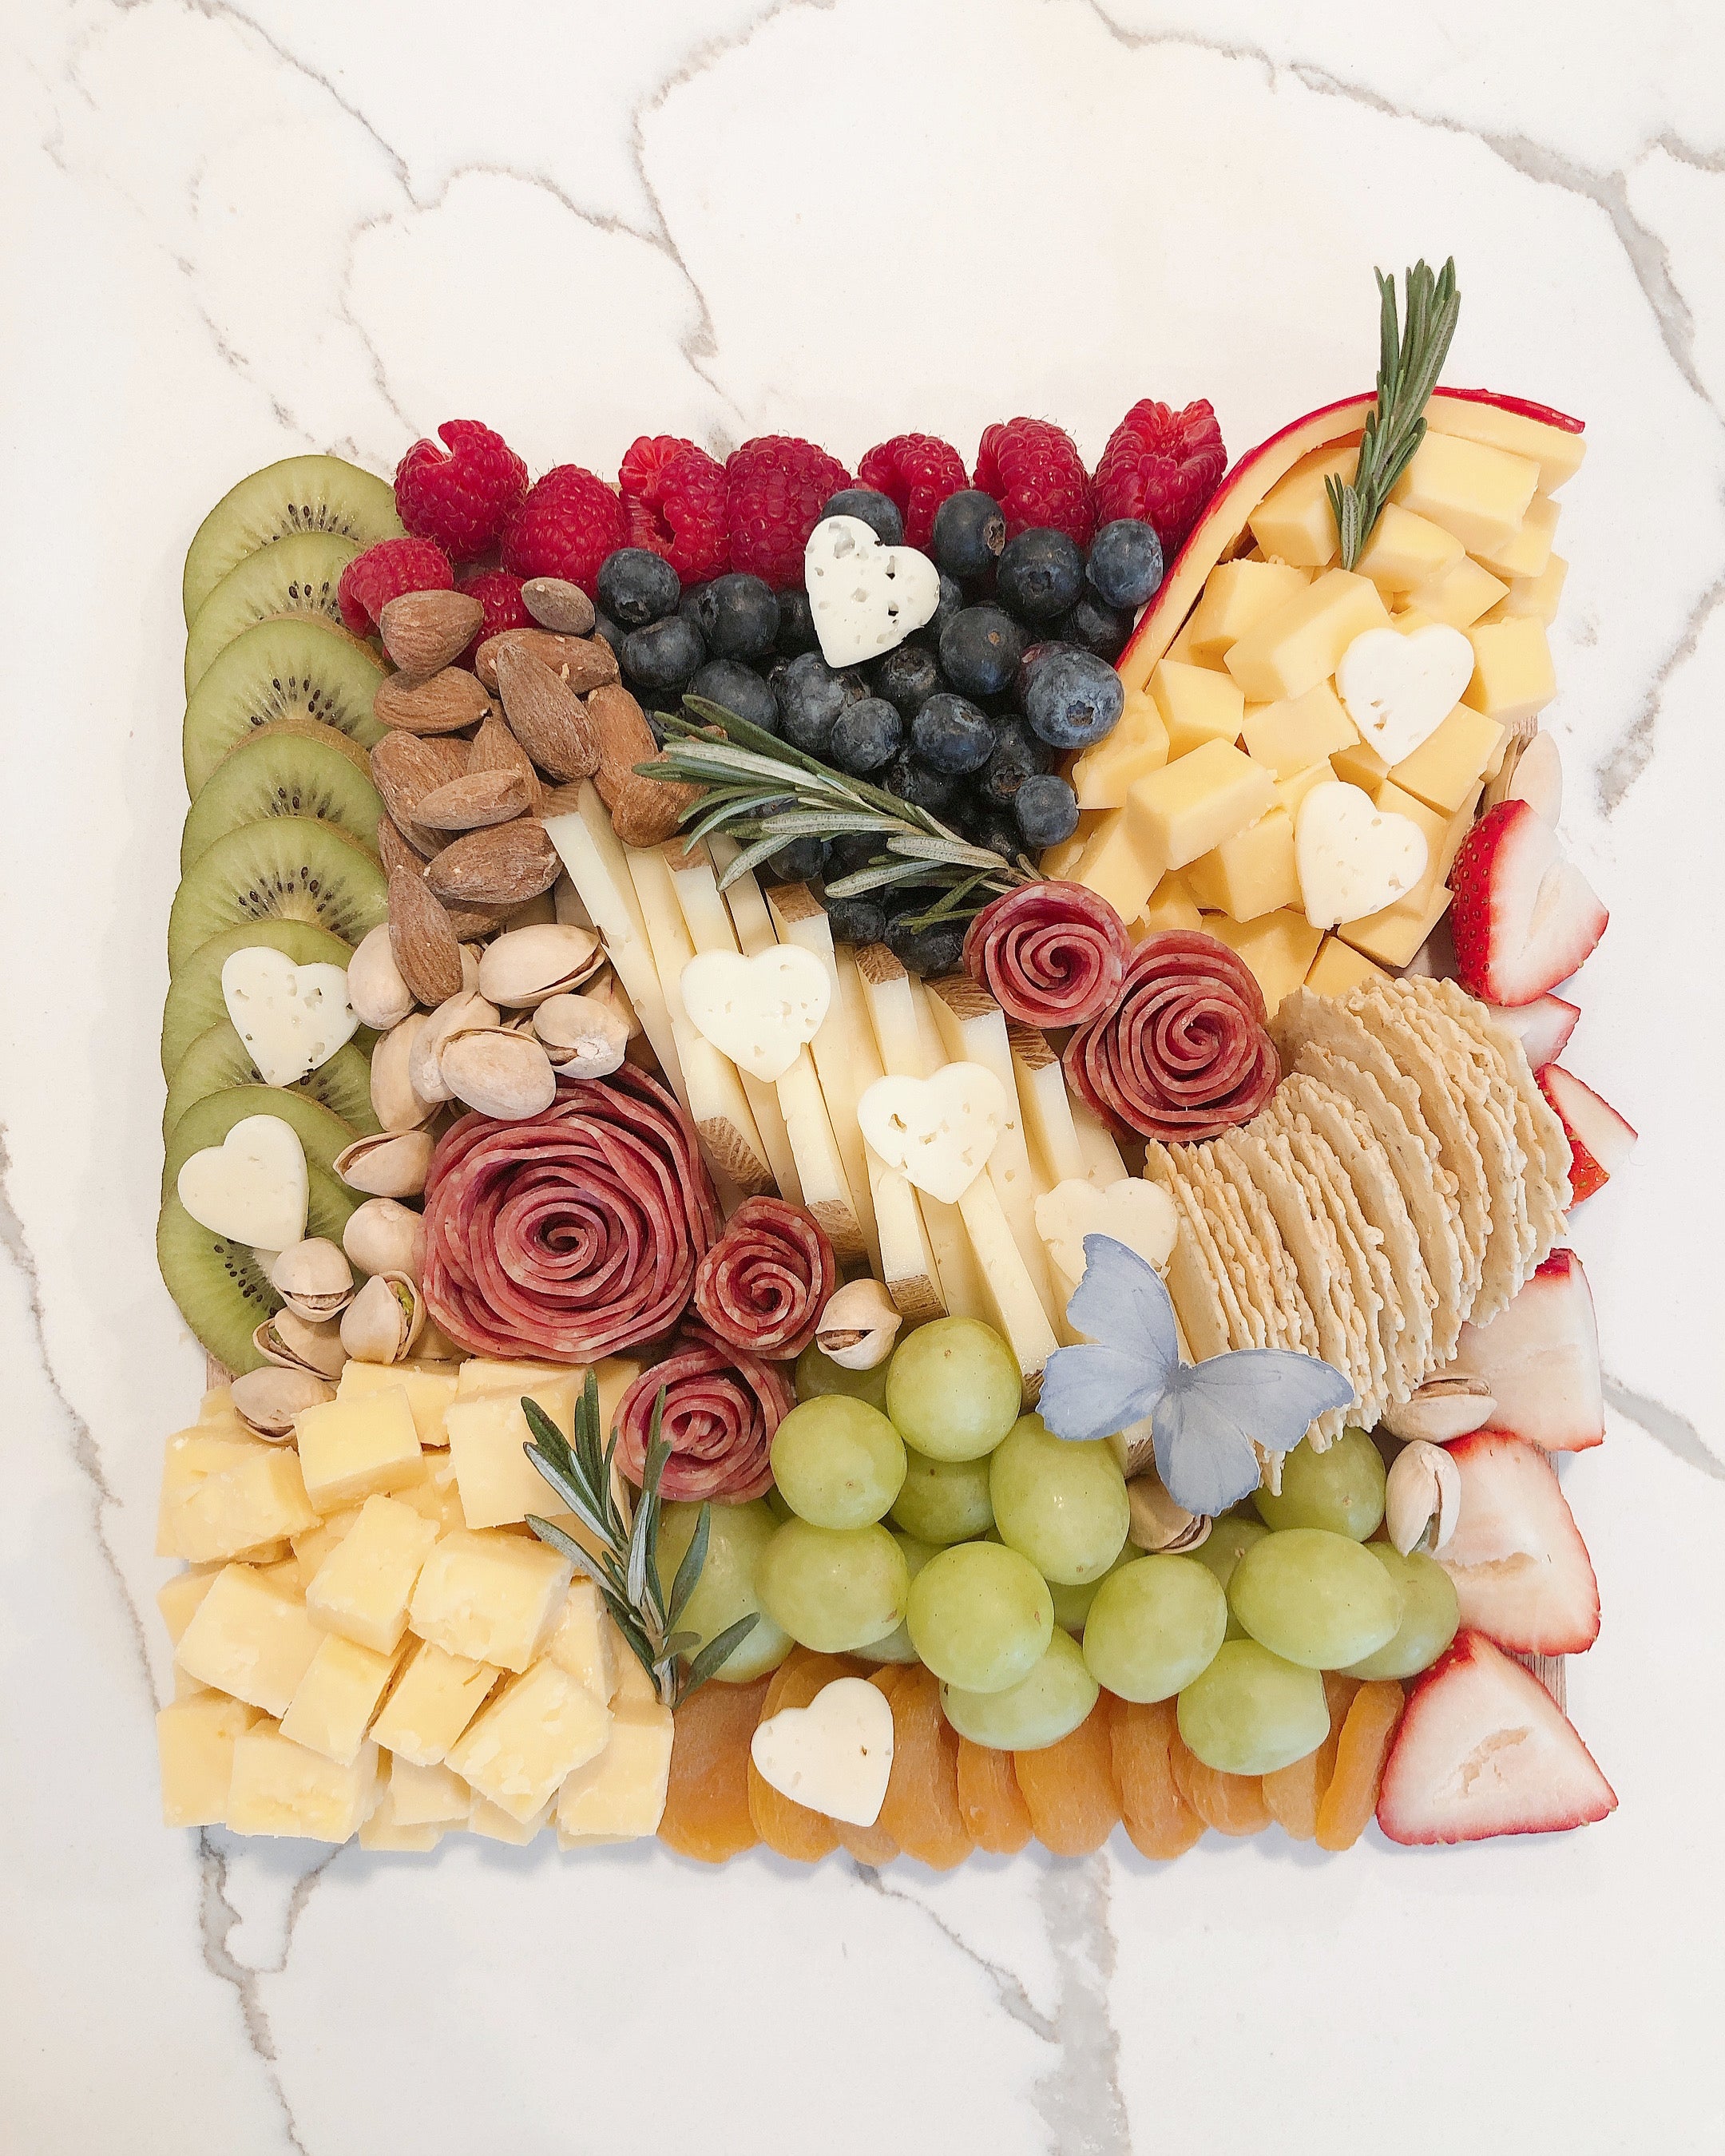 Small Cheeseboard For 5-7 People